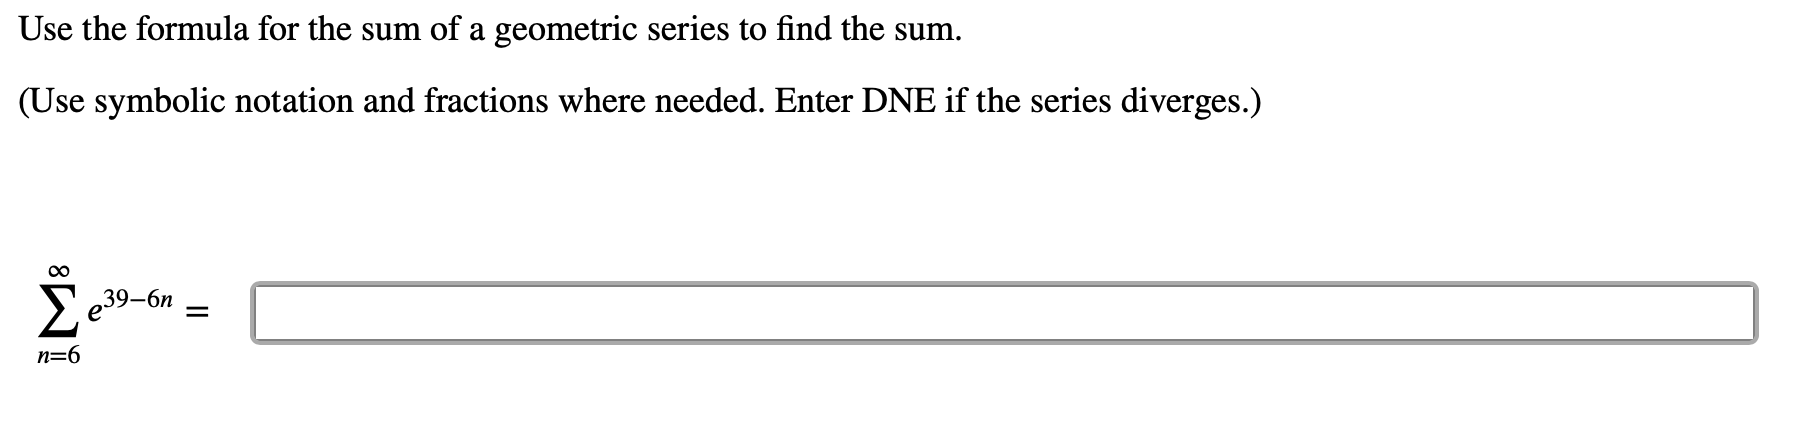 Use the formula for the sum of a geometric series to find the sum.
(Use symbolic notation and fractions where needed. Enter DNE if the series diverges.)
e39-6n
n=6
||
